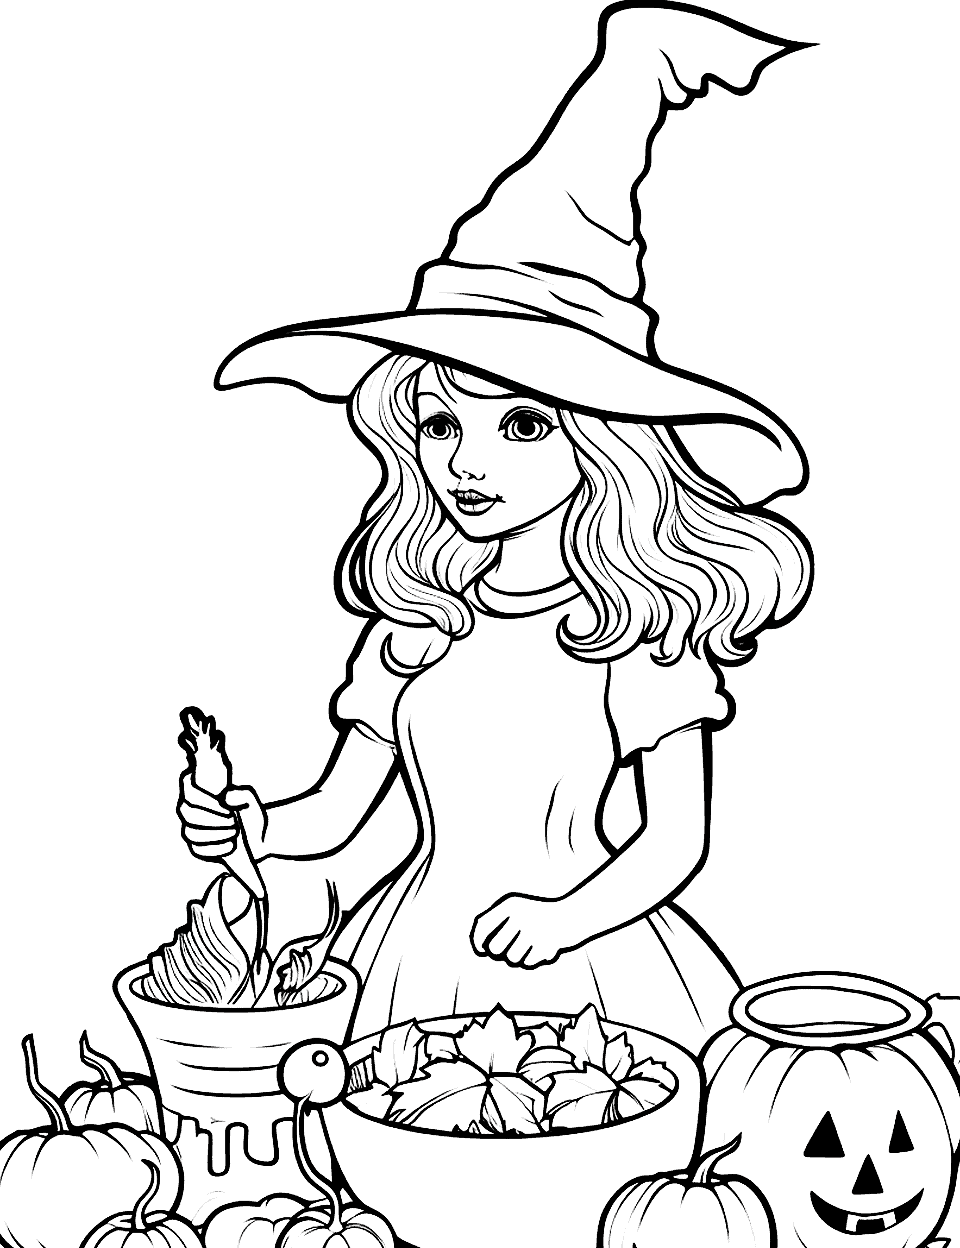 Witch's Midnight Snack Witch Coloring Page - A witch in her kitchen making a snack with magical ingredients.